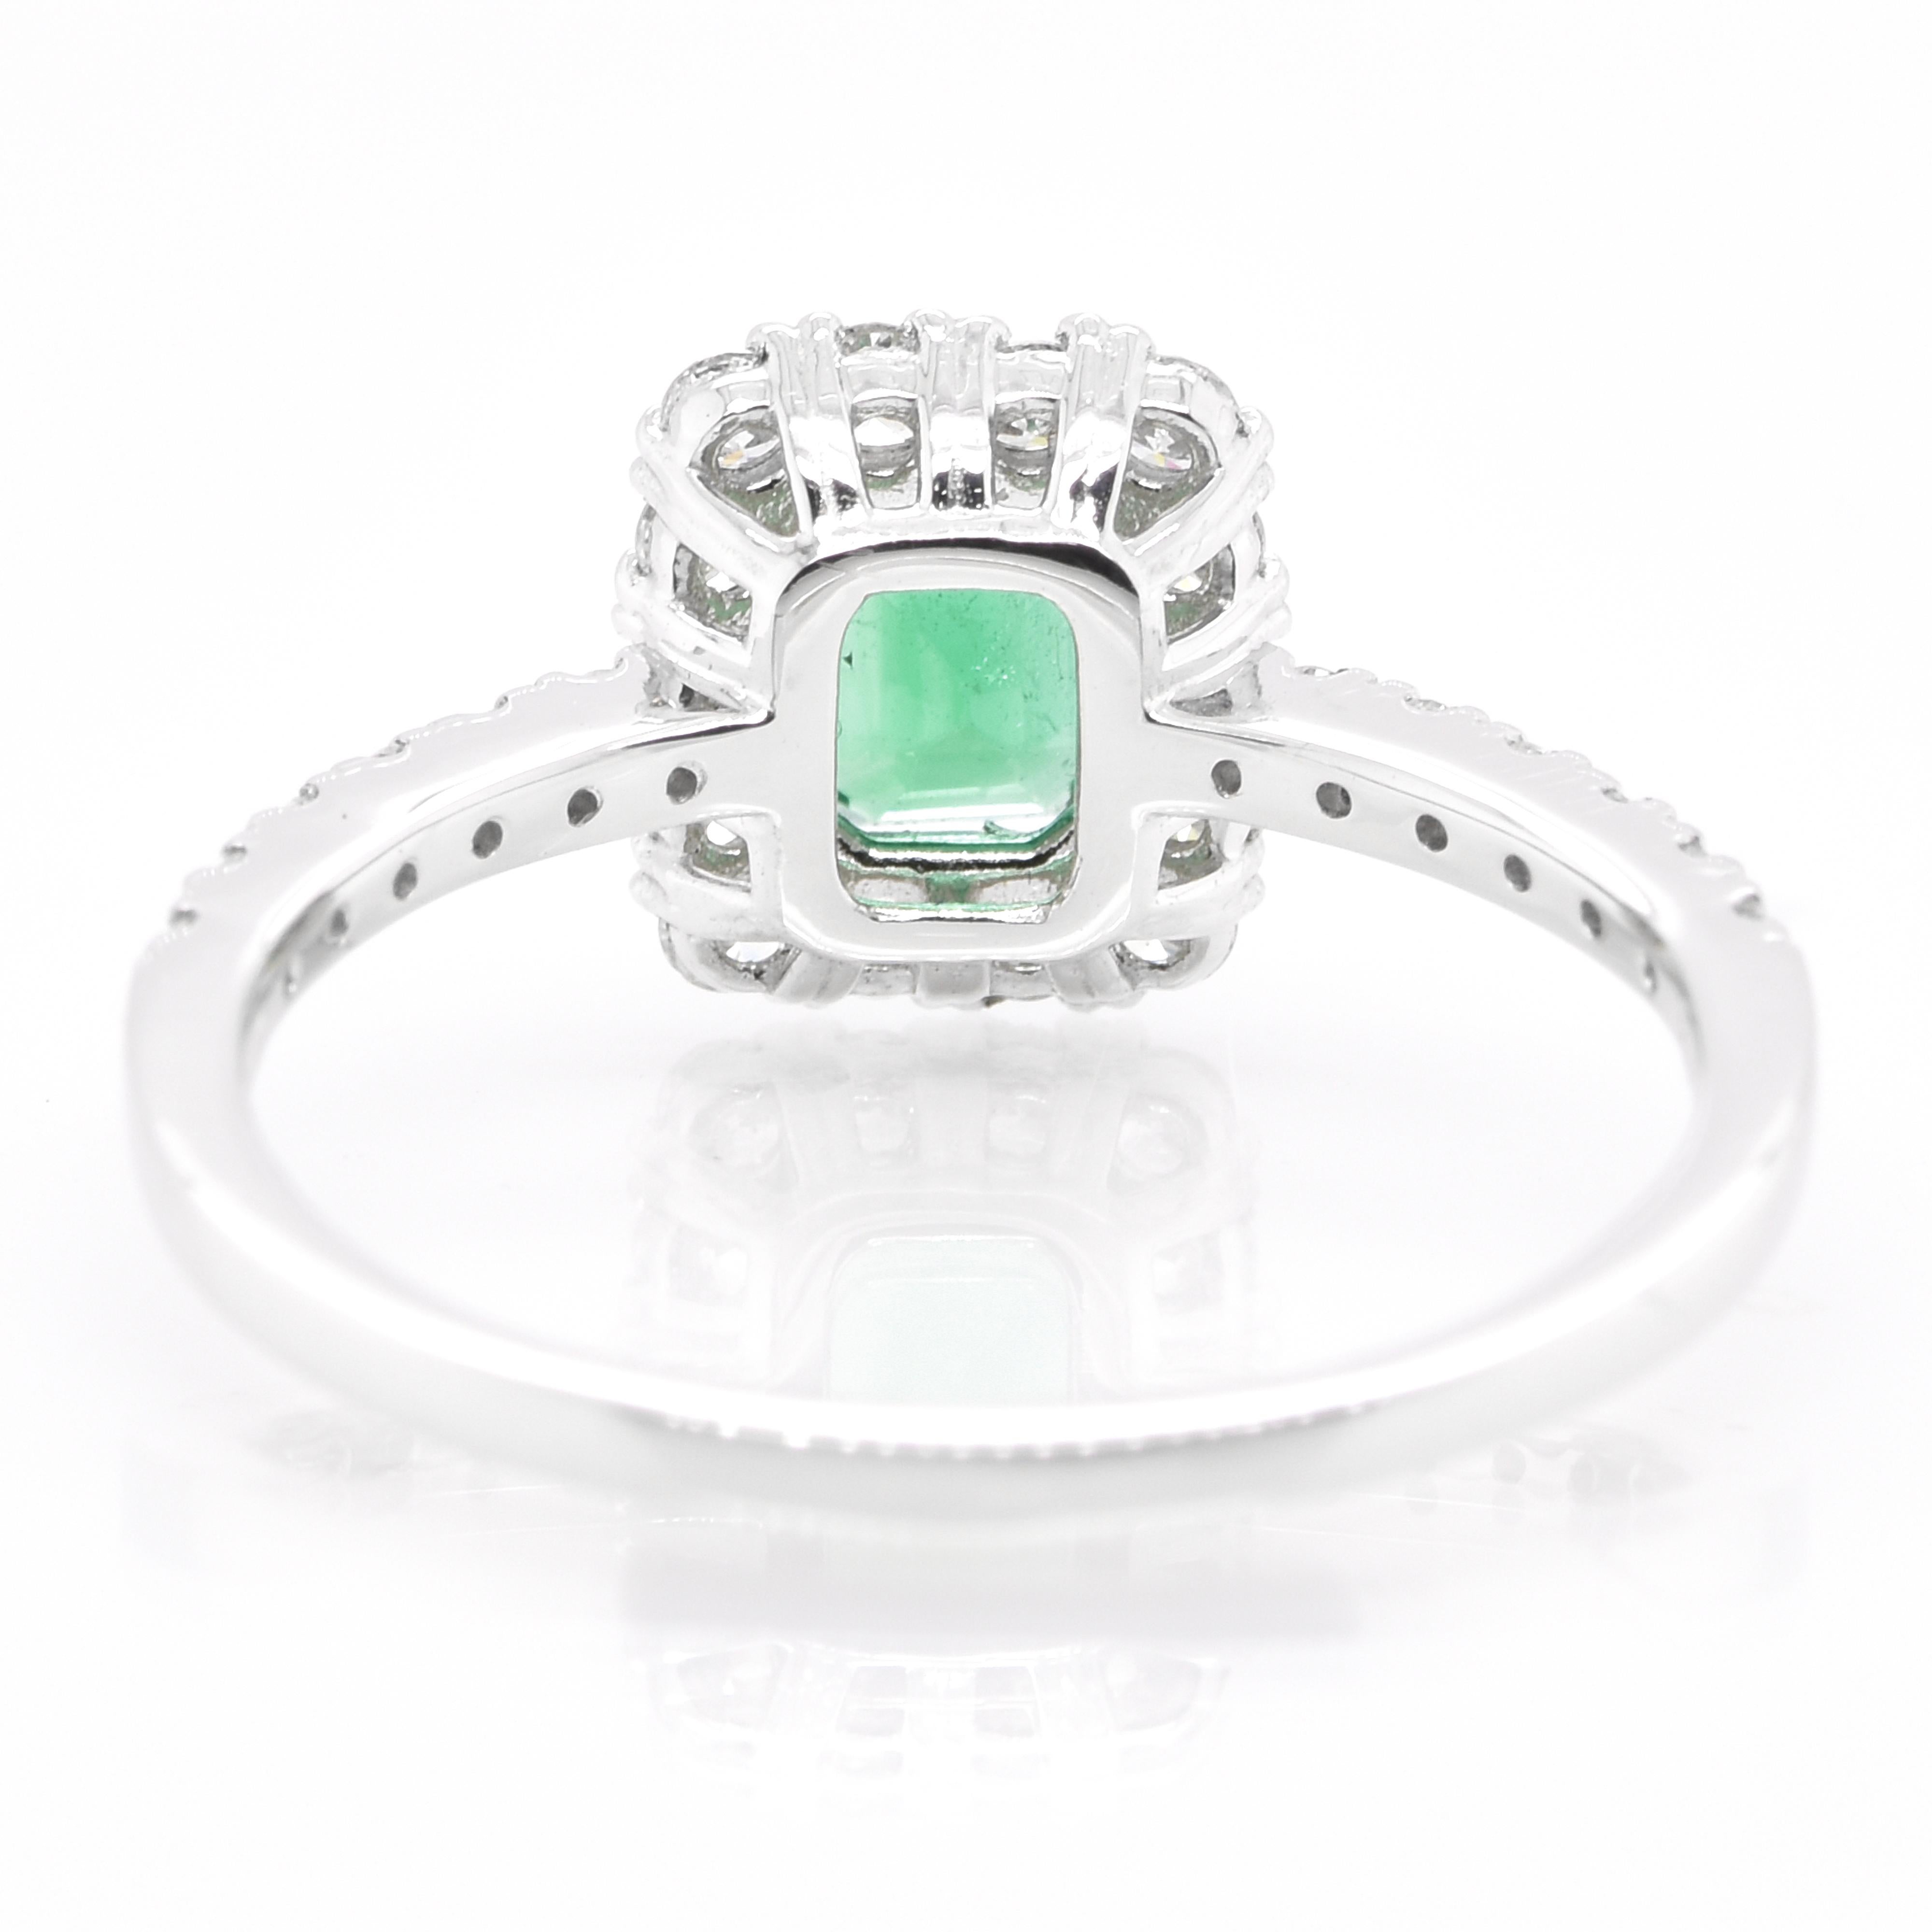 A stunning ring featuring a 0.47 Carat Natural Emerald and 0.37 Carats of Diamond Accents set in Platinum. People have admired emerald’s green for thousands of years. Emeralds have always been associated with the lushest landscapes and the richest